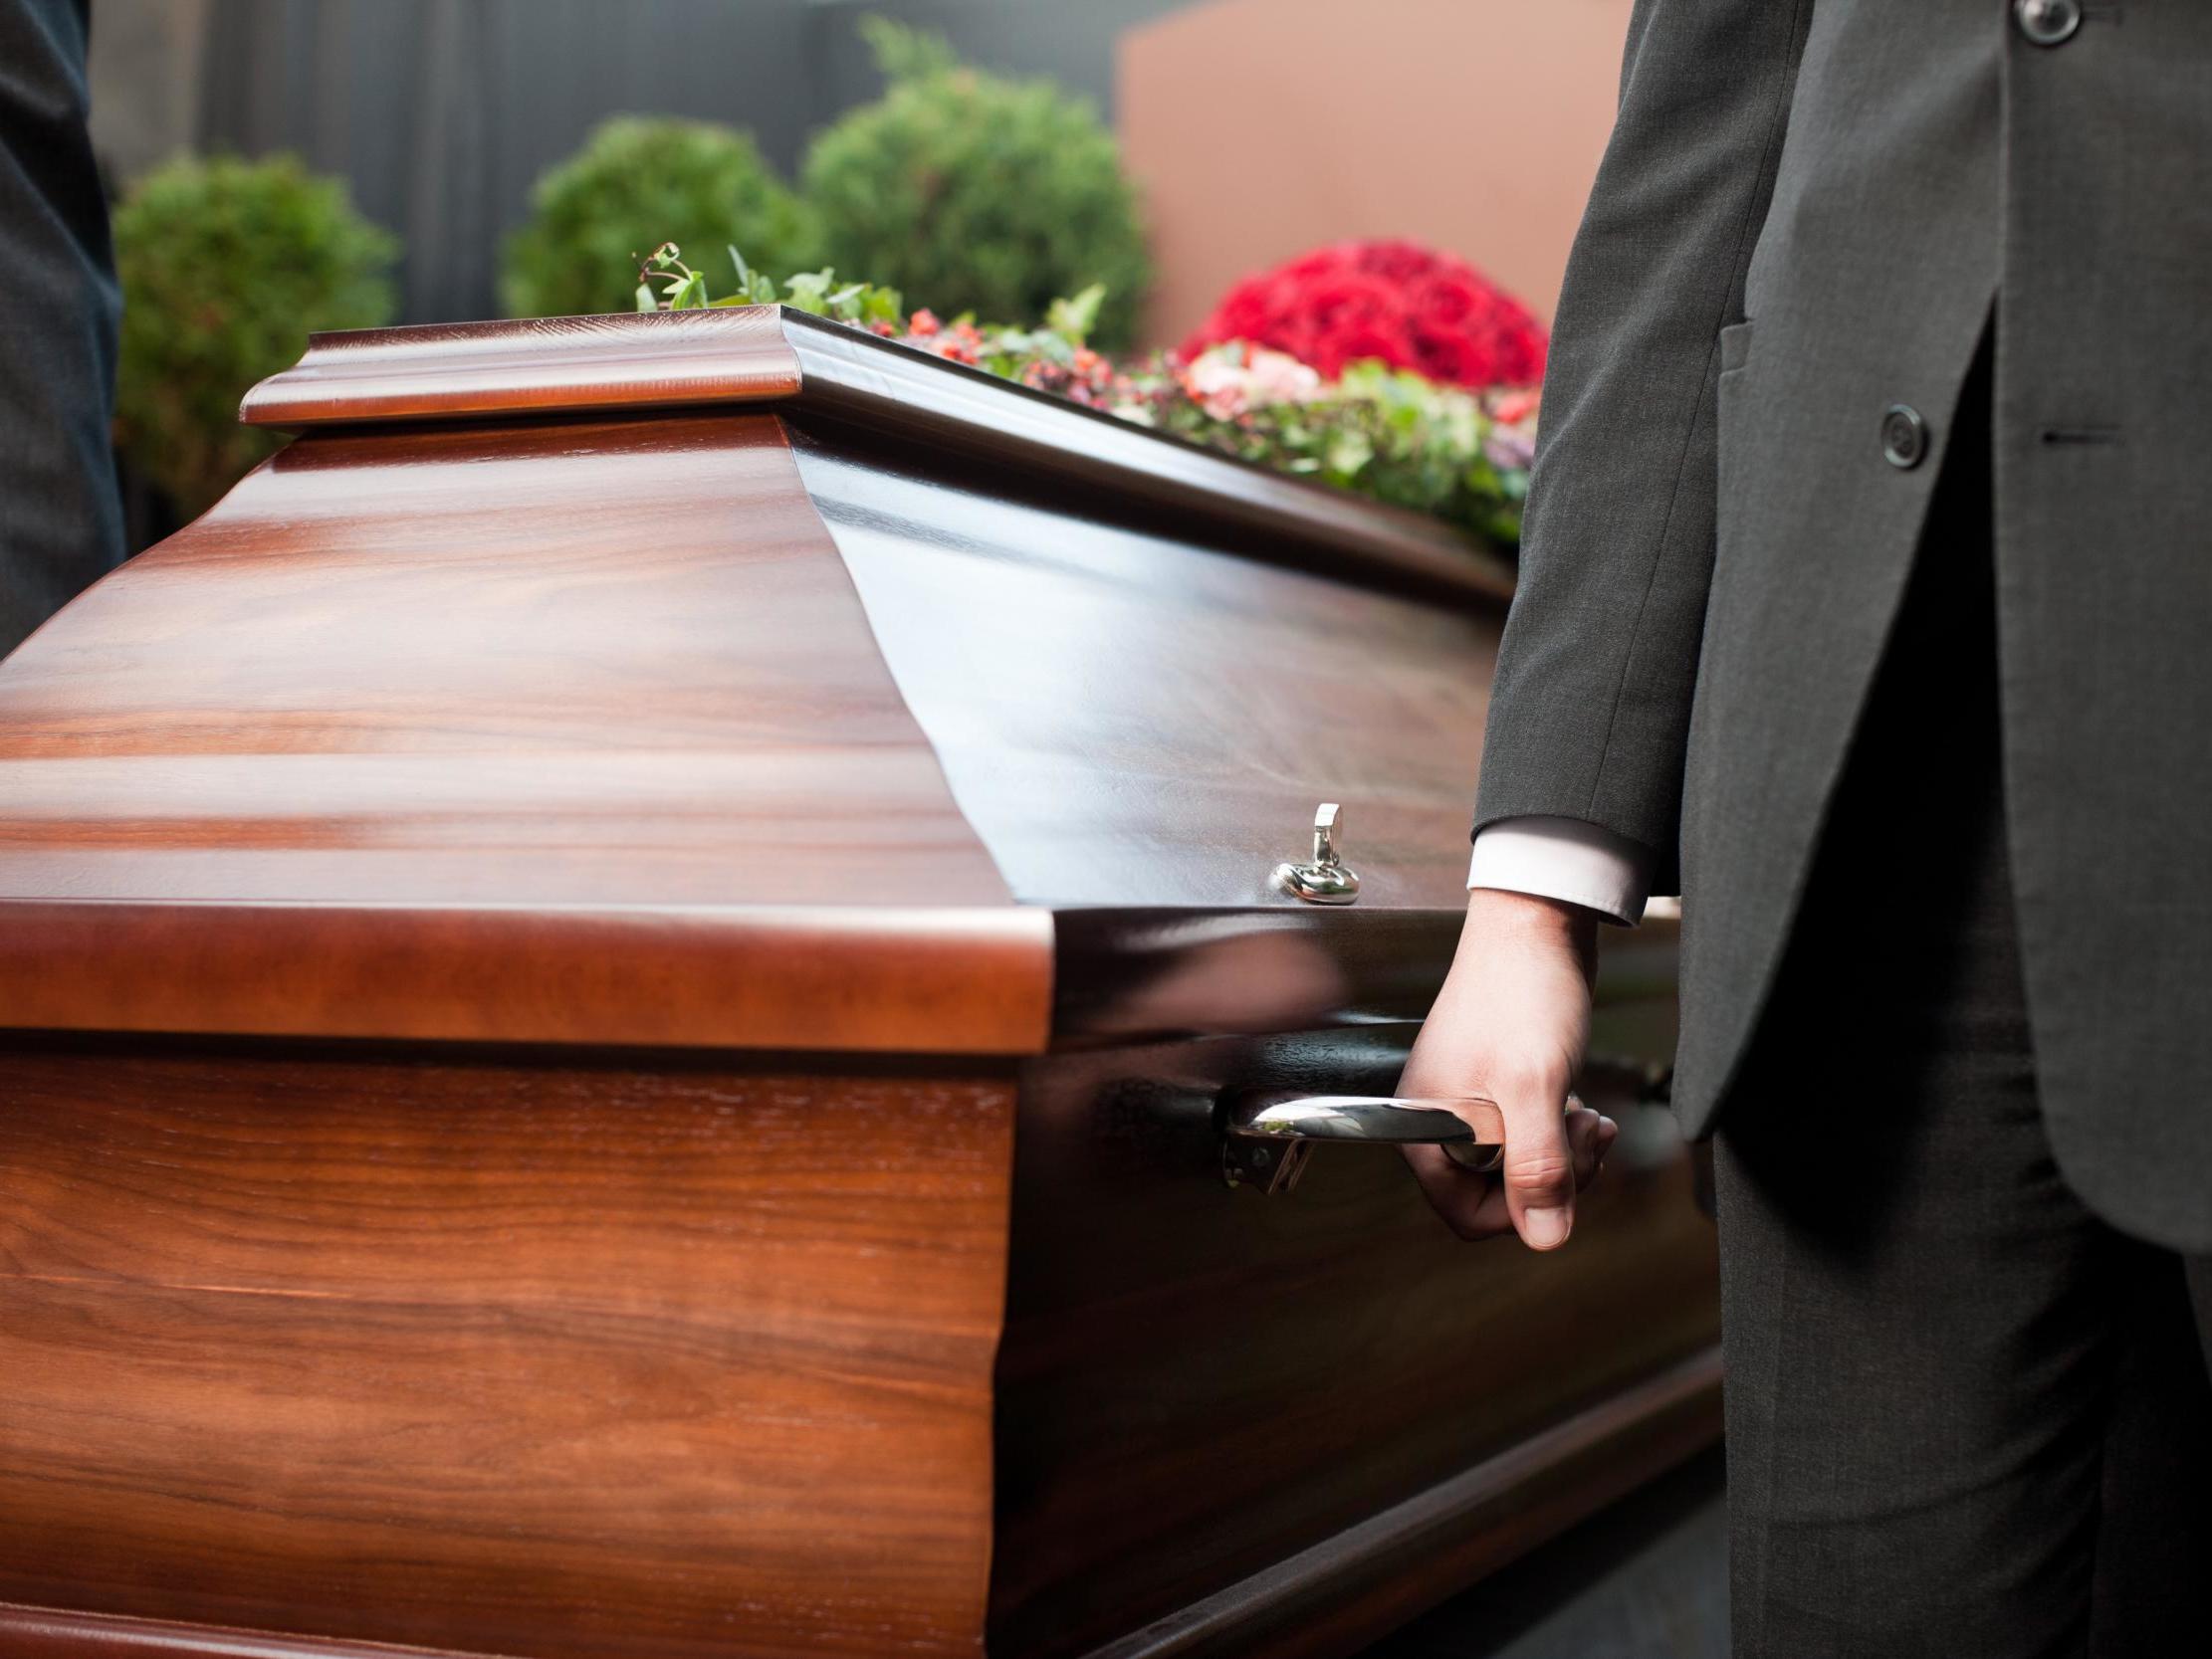 The government says only close family members should attend funerals